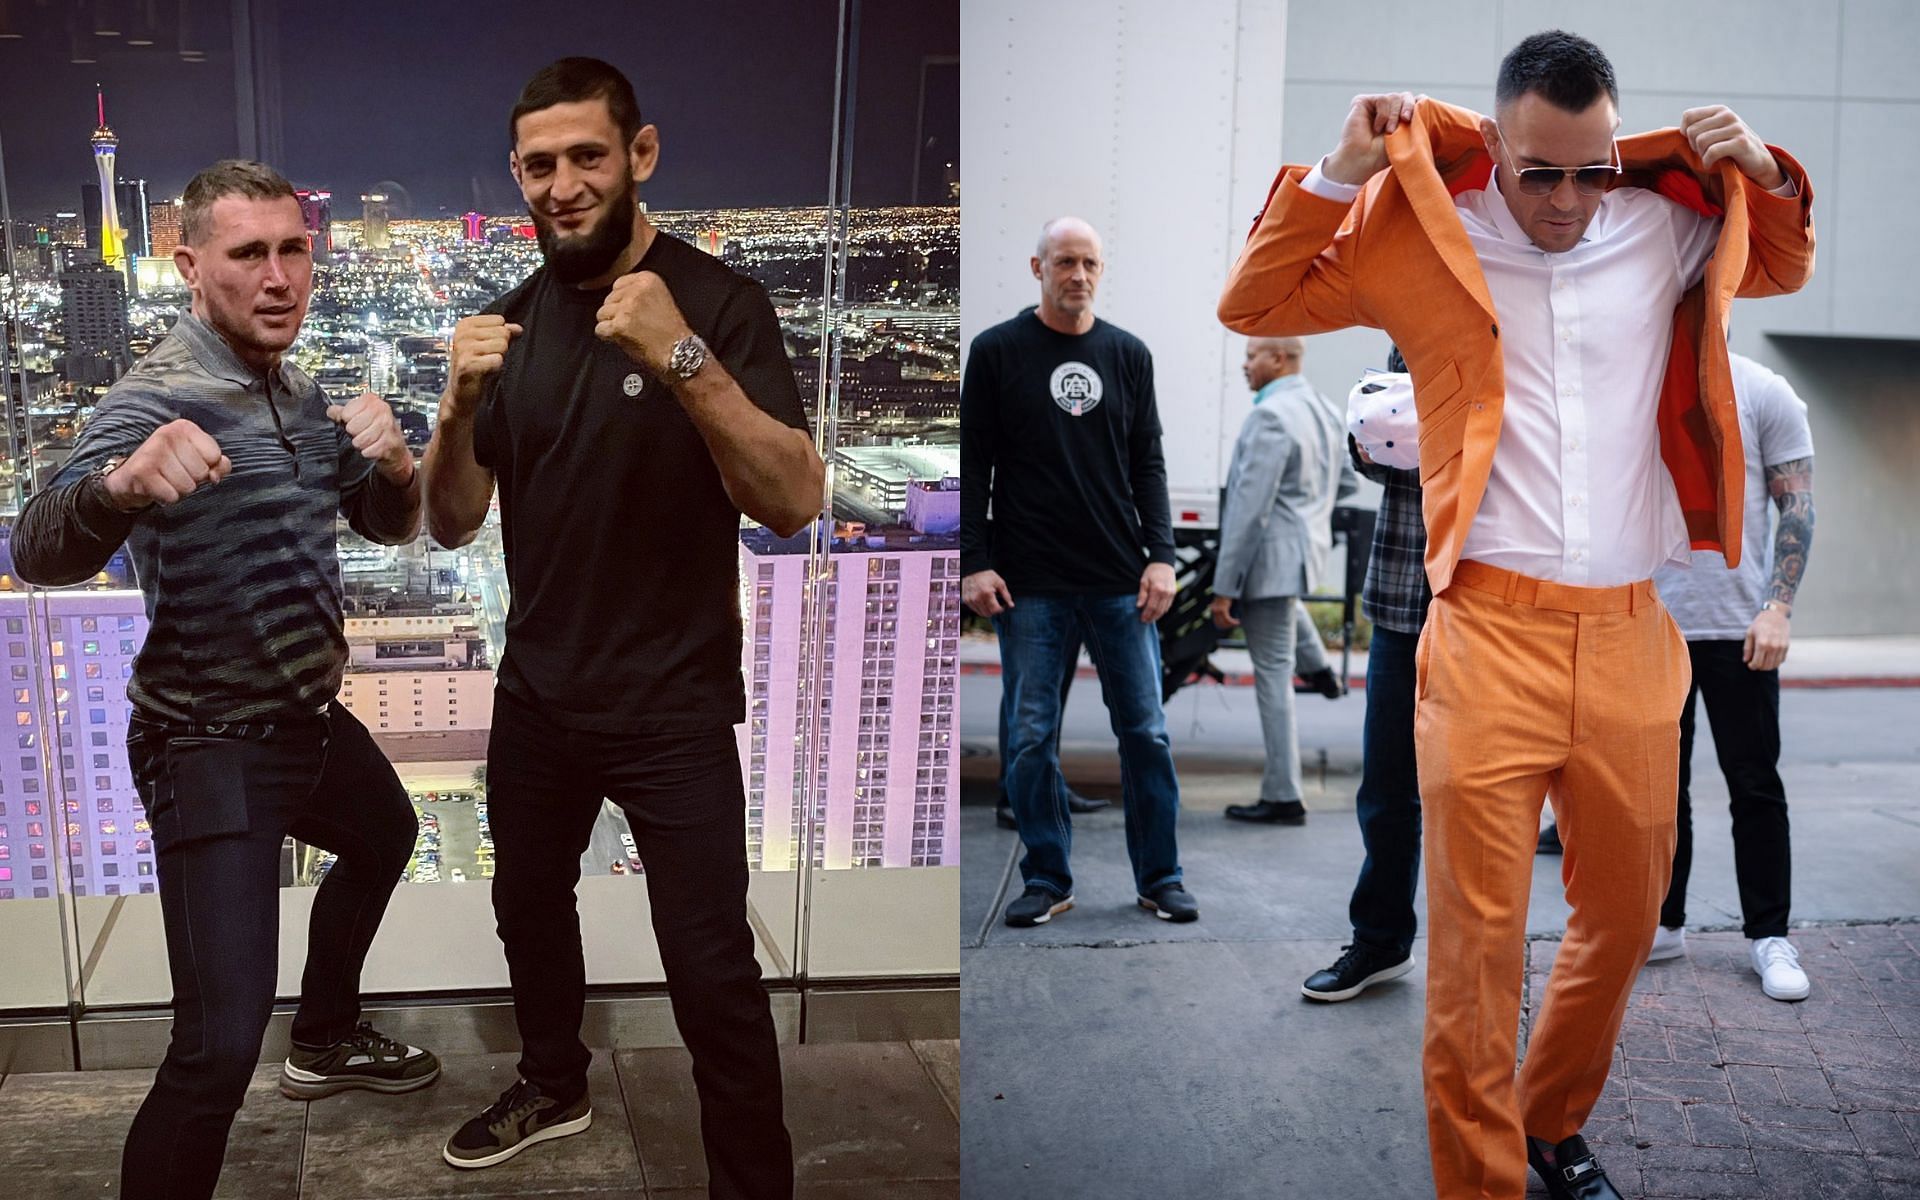 Khamzat Chimaev and Darren Till [Left] Colby Covington [Right] [Images courtesy: @KChimaev and @ColbyCovMMA Twitter]